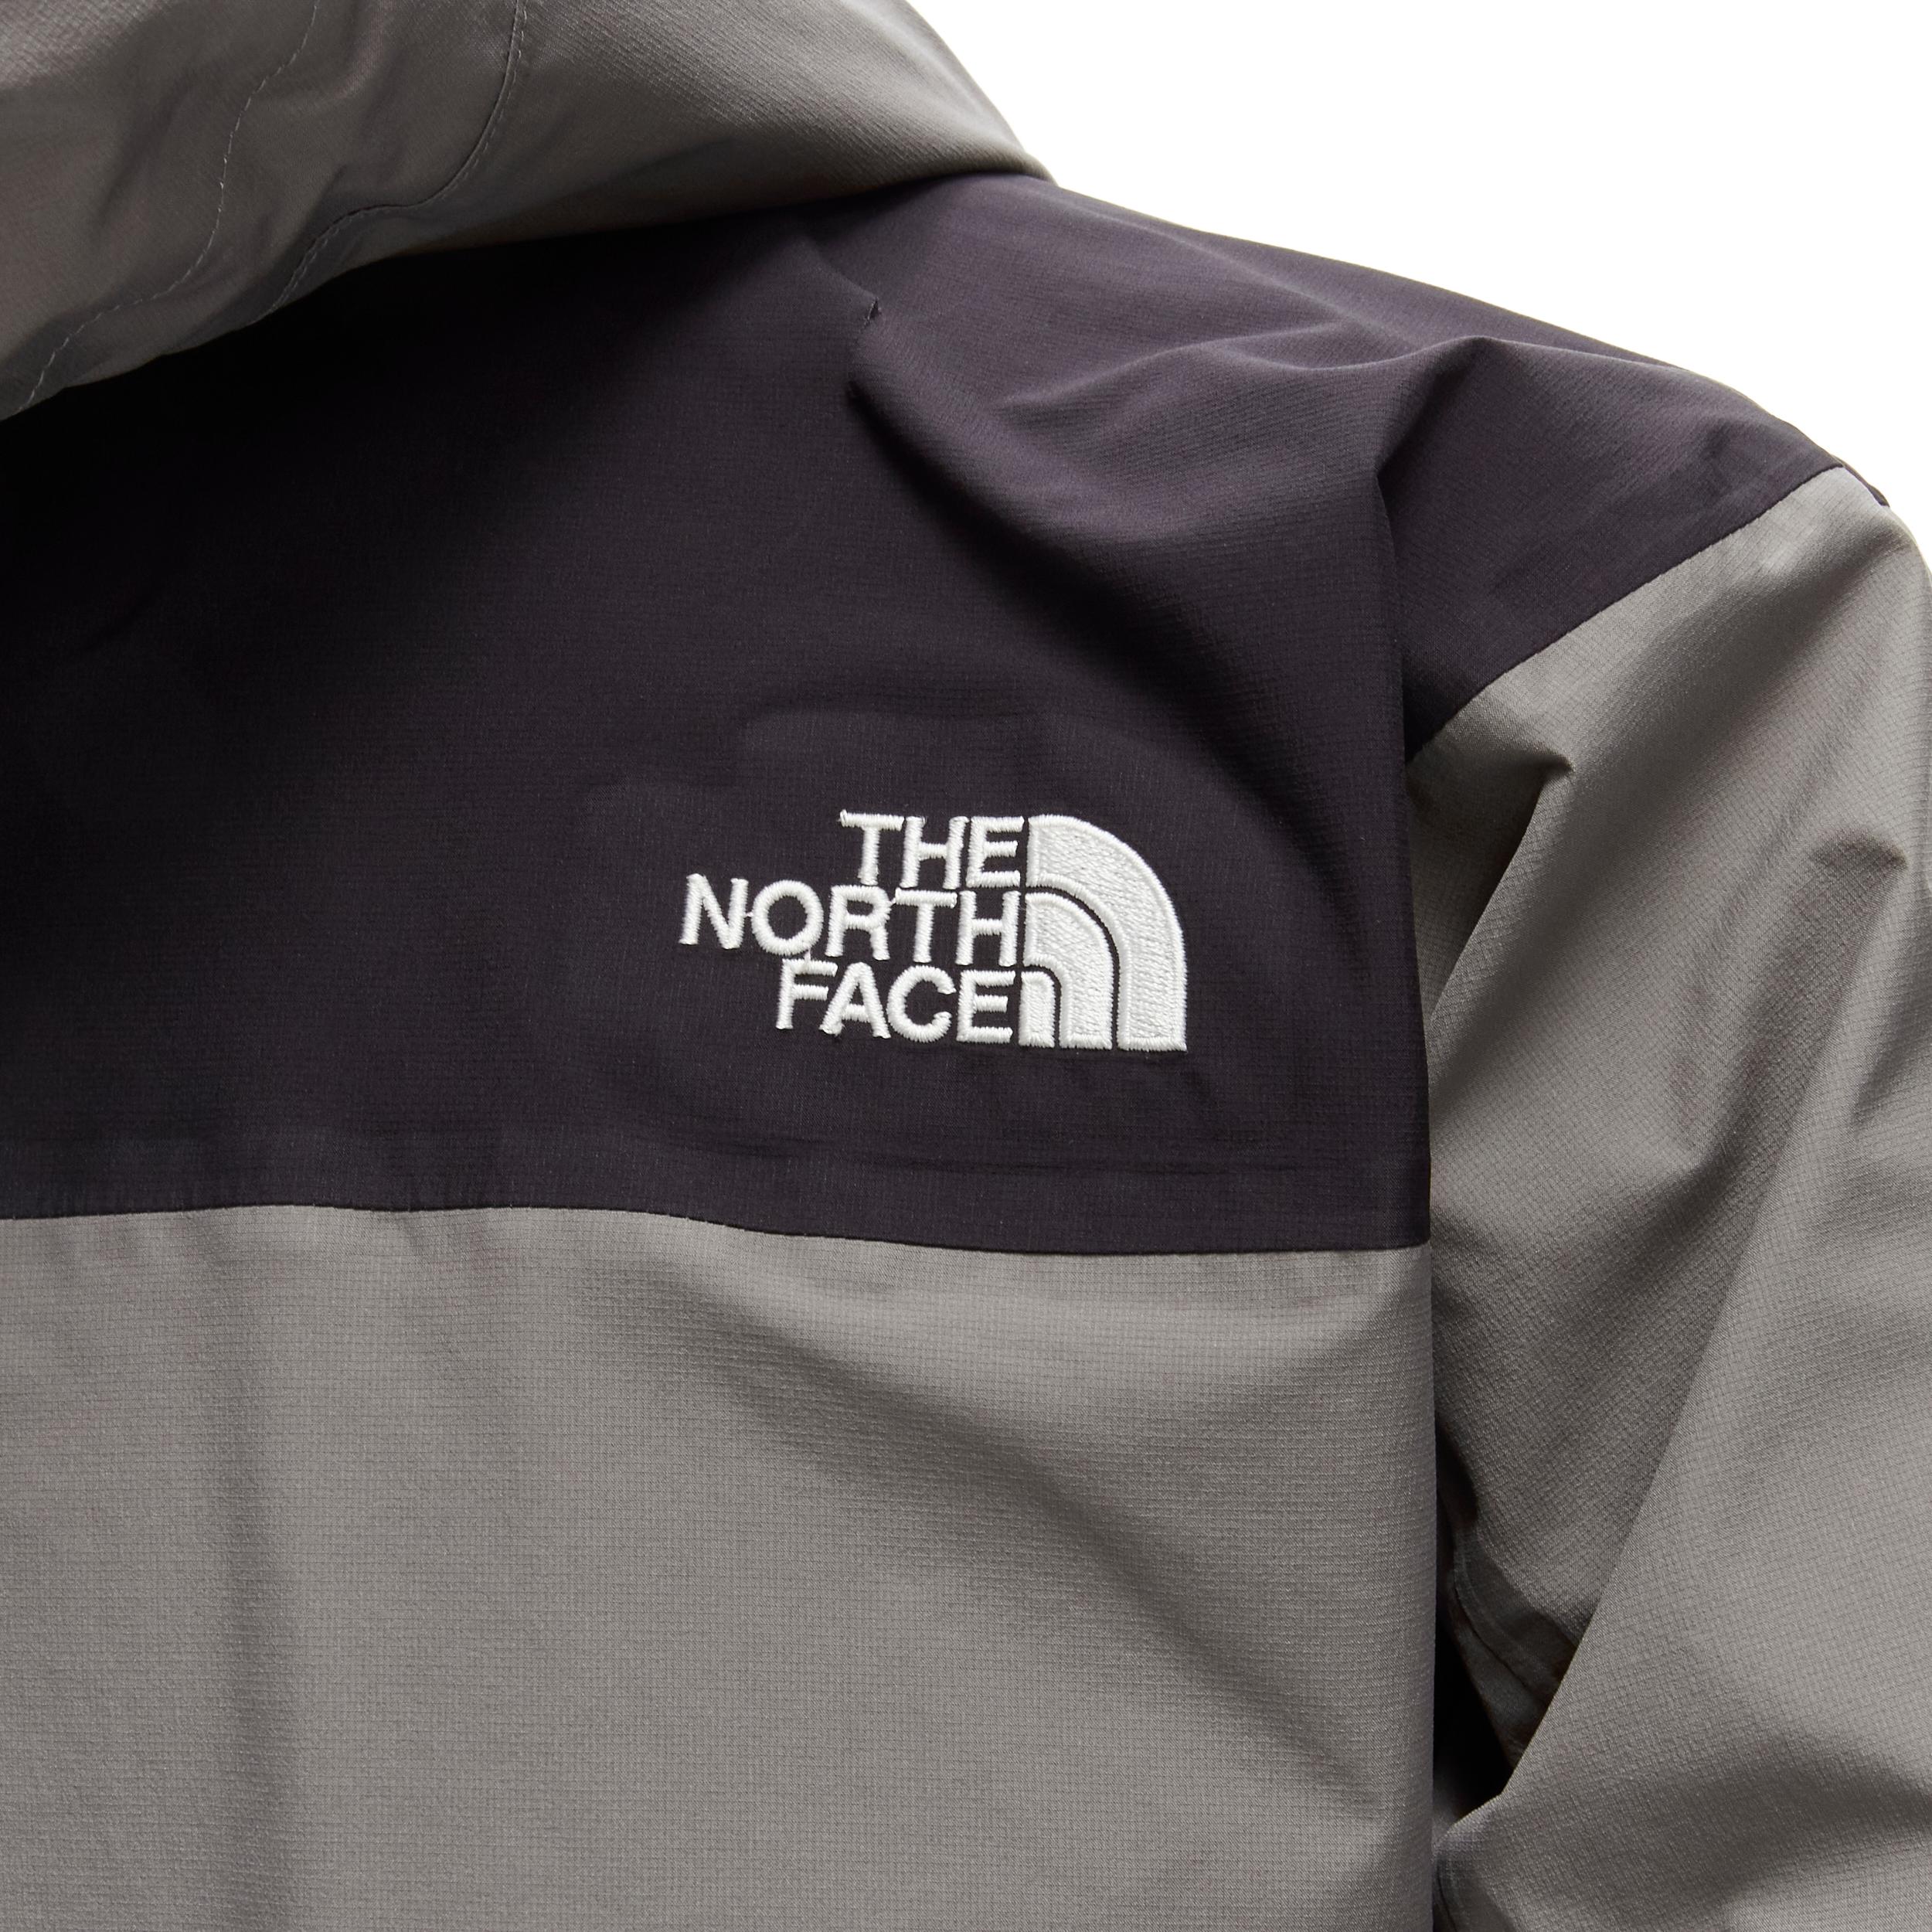 THE NORTH FACE Gore Tex grey black TNF logo red zipper hooded windbreaker S
Reference: CRTI/A00758
Brand: The North Face
Material: Nylon
Color: Grey
Pattern: Solid
Closure: Zip
Lining: Fabric
Extra Details: Adjustable cuffs.
Made in: